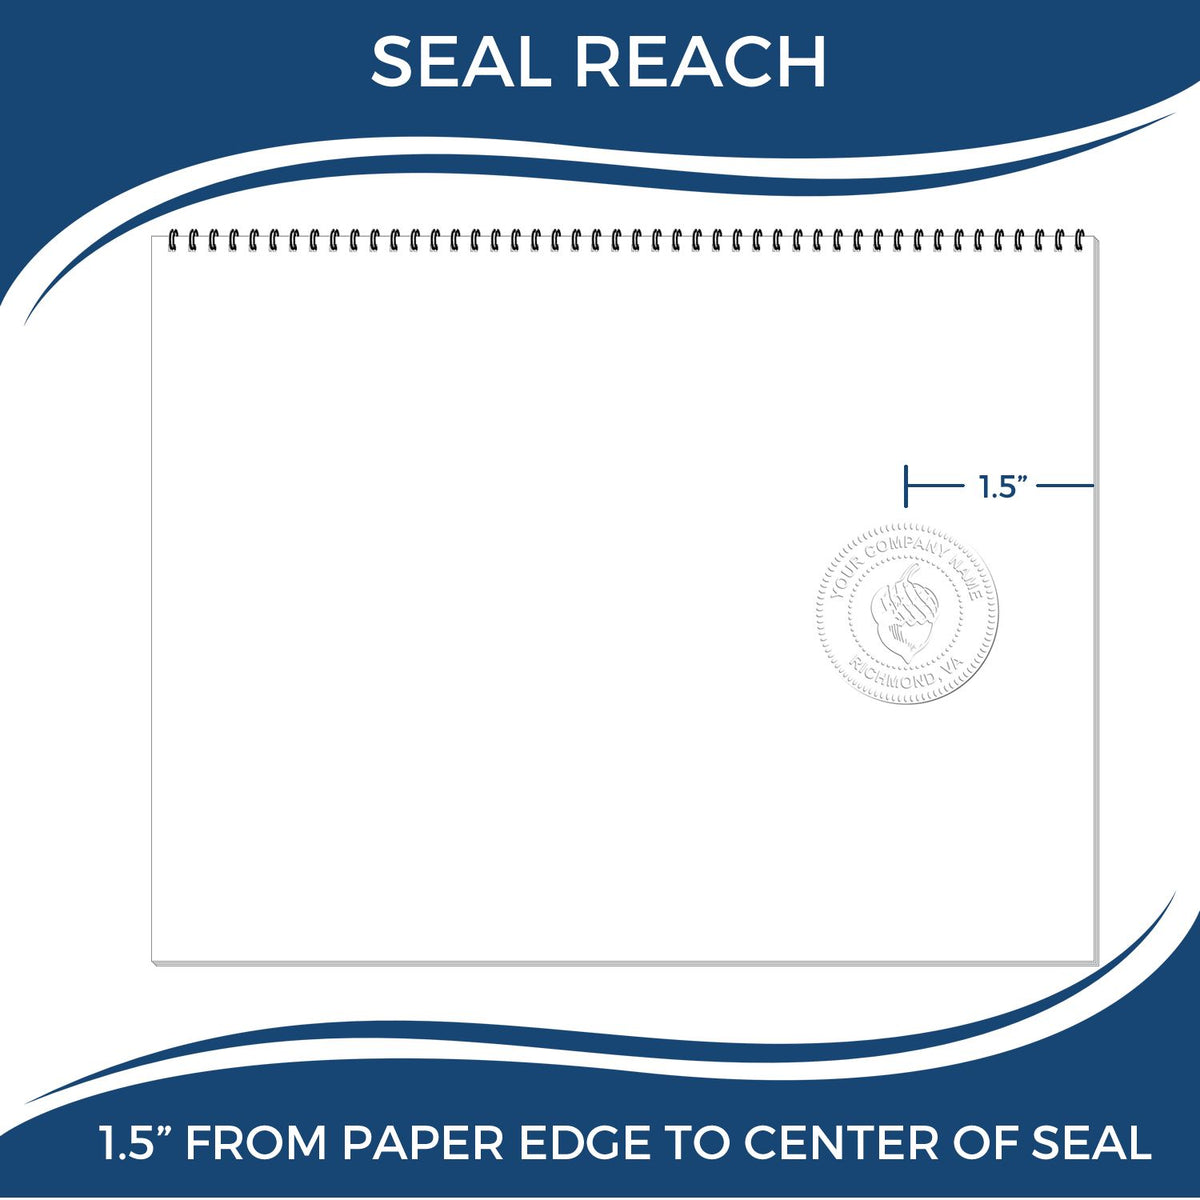 An infographic showing the seal reach which is represented by a ruler and a miniature seal image of the State of Tennessee Soft Land Surveyor Embossing Seal